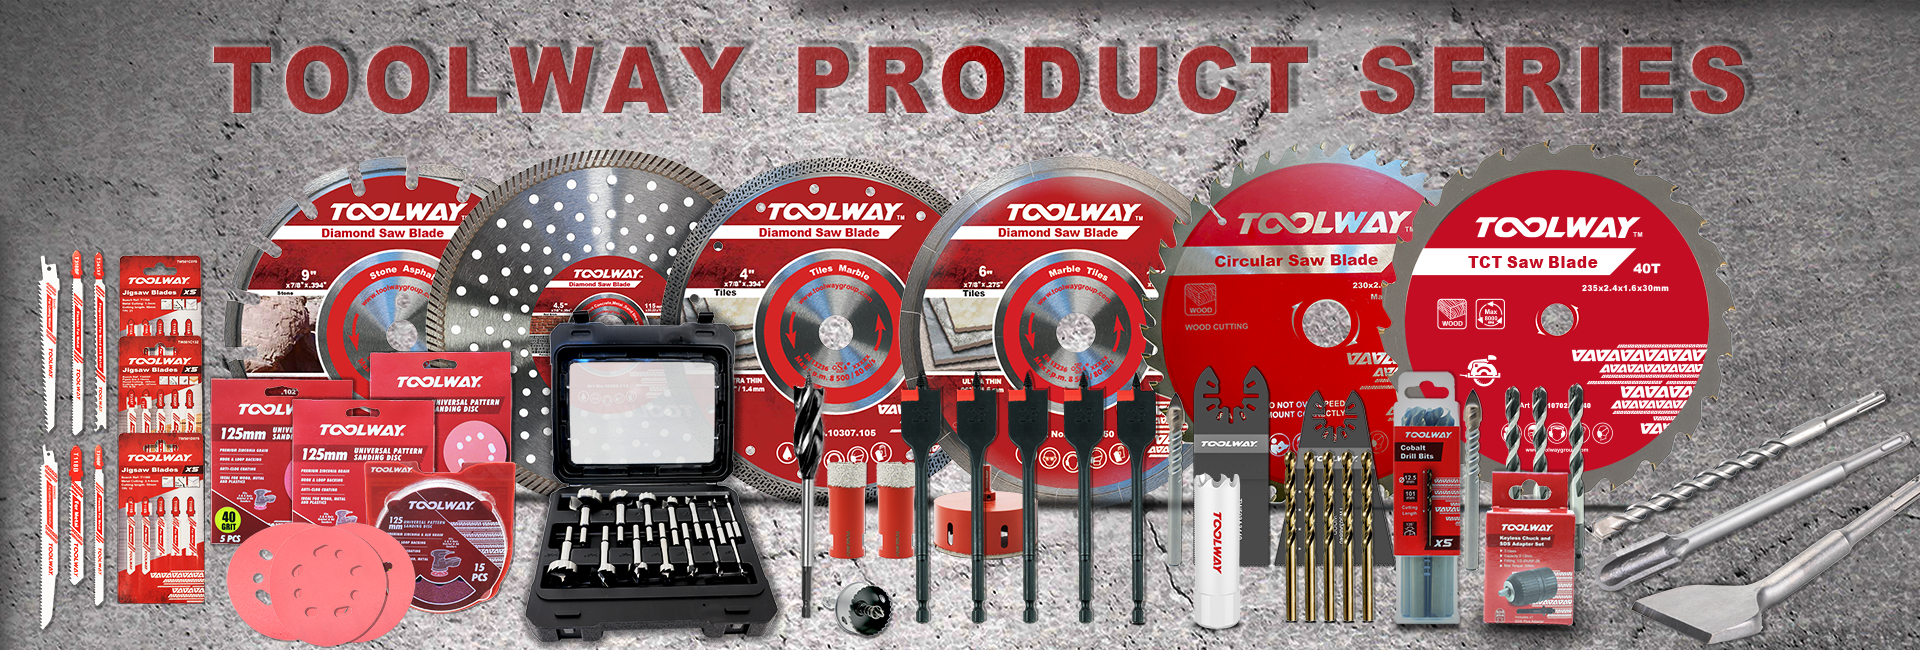 BANNER-TOOLWAY